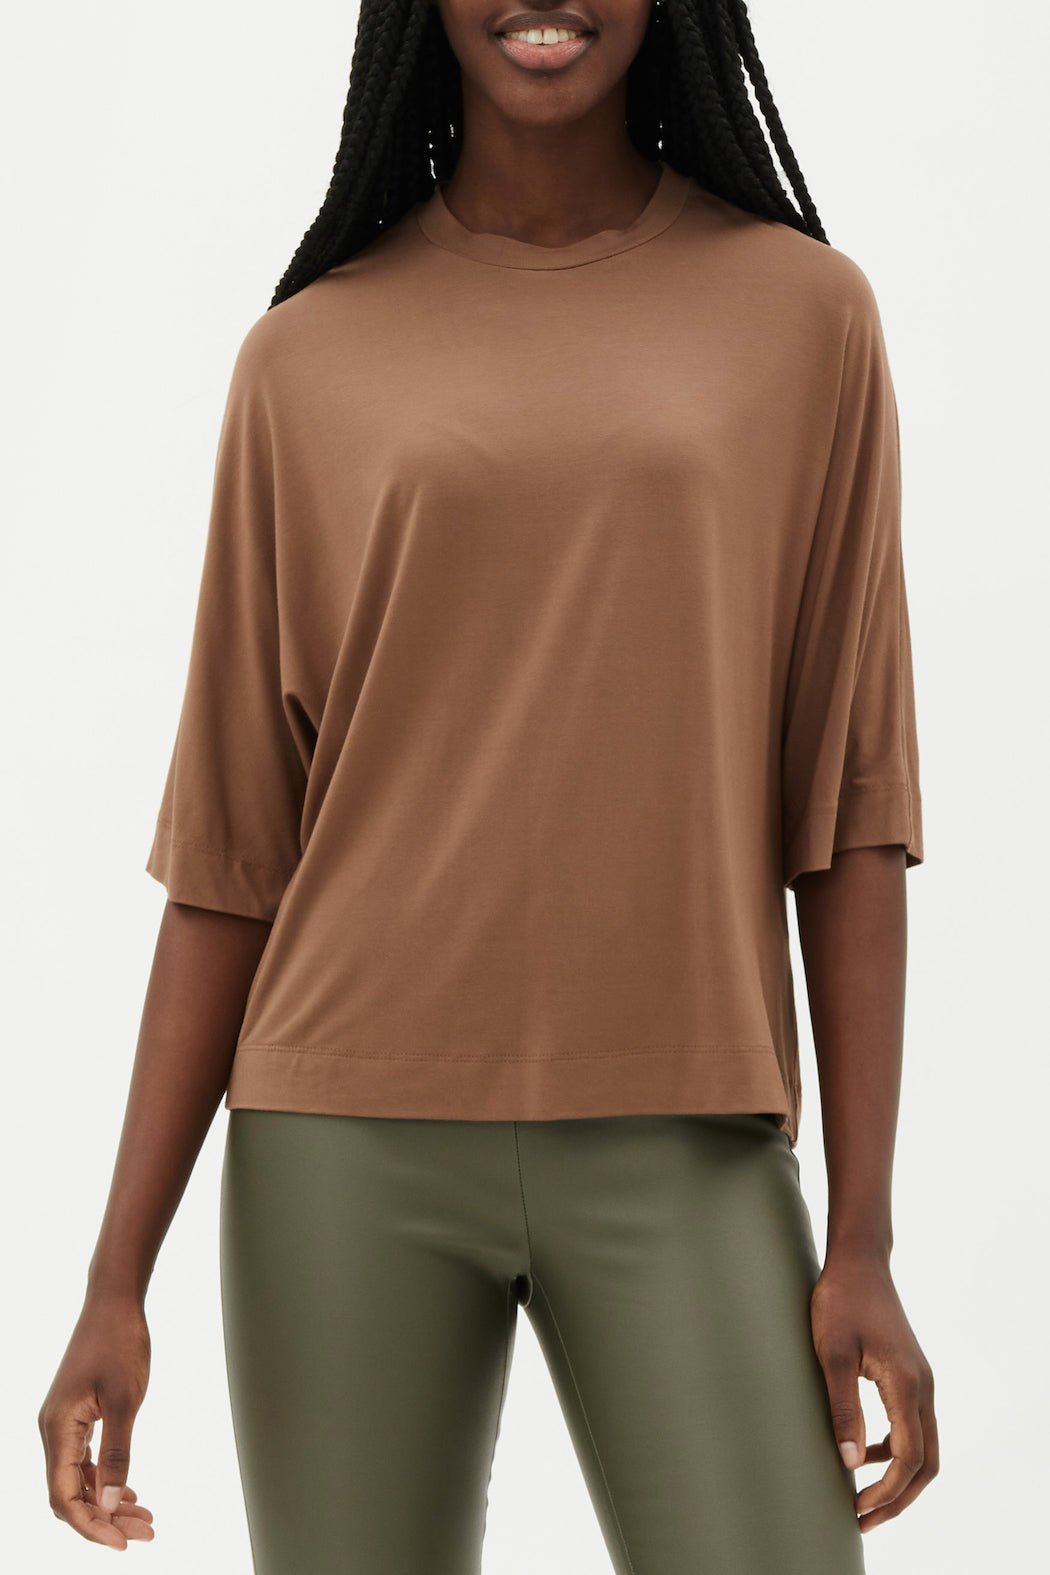 The Vince Top - Camel | ILTM - Clearance